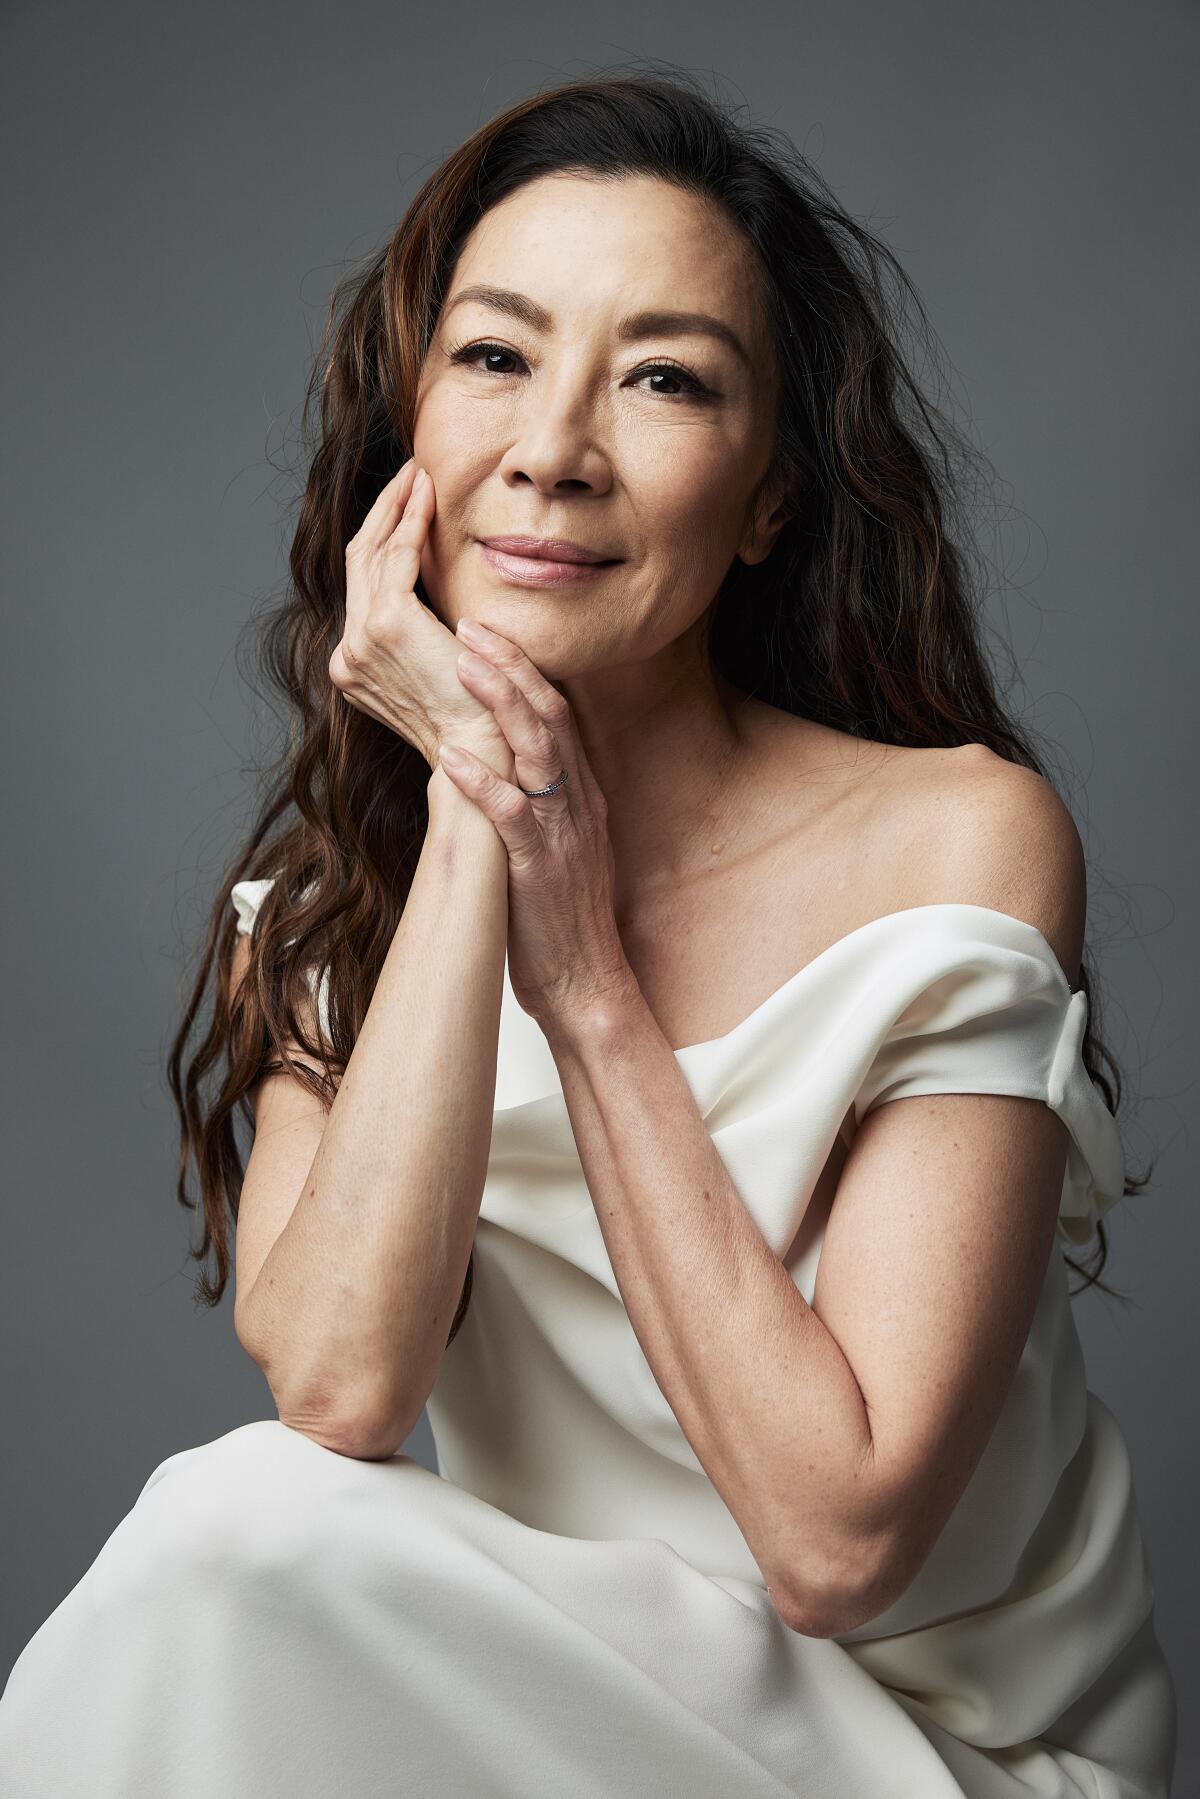 Michelle Yeoh wears a white dress for a portrait.